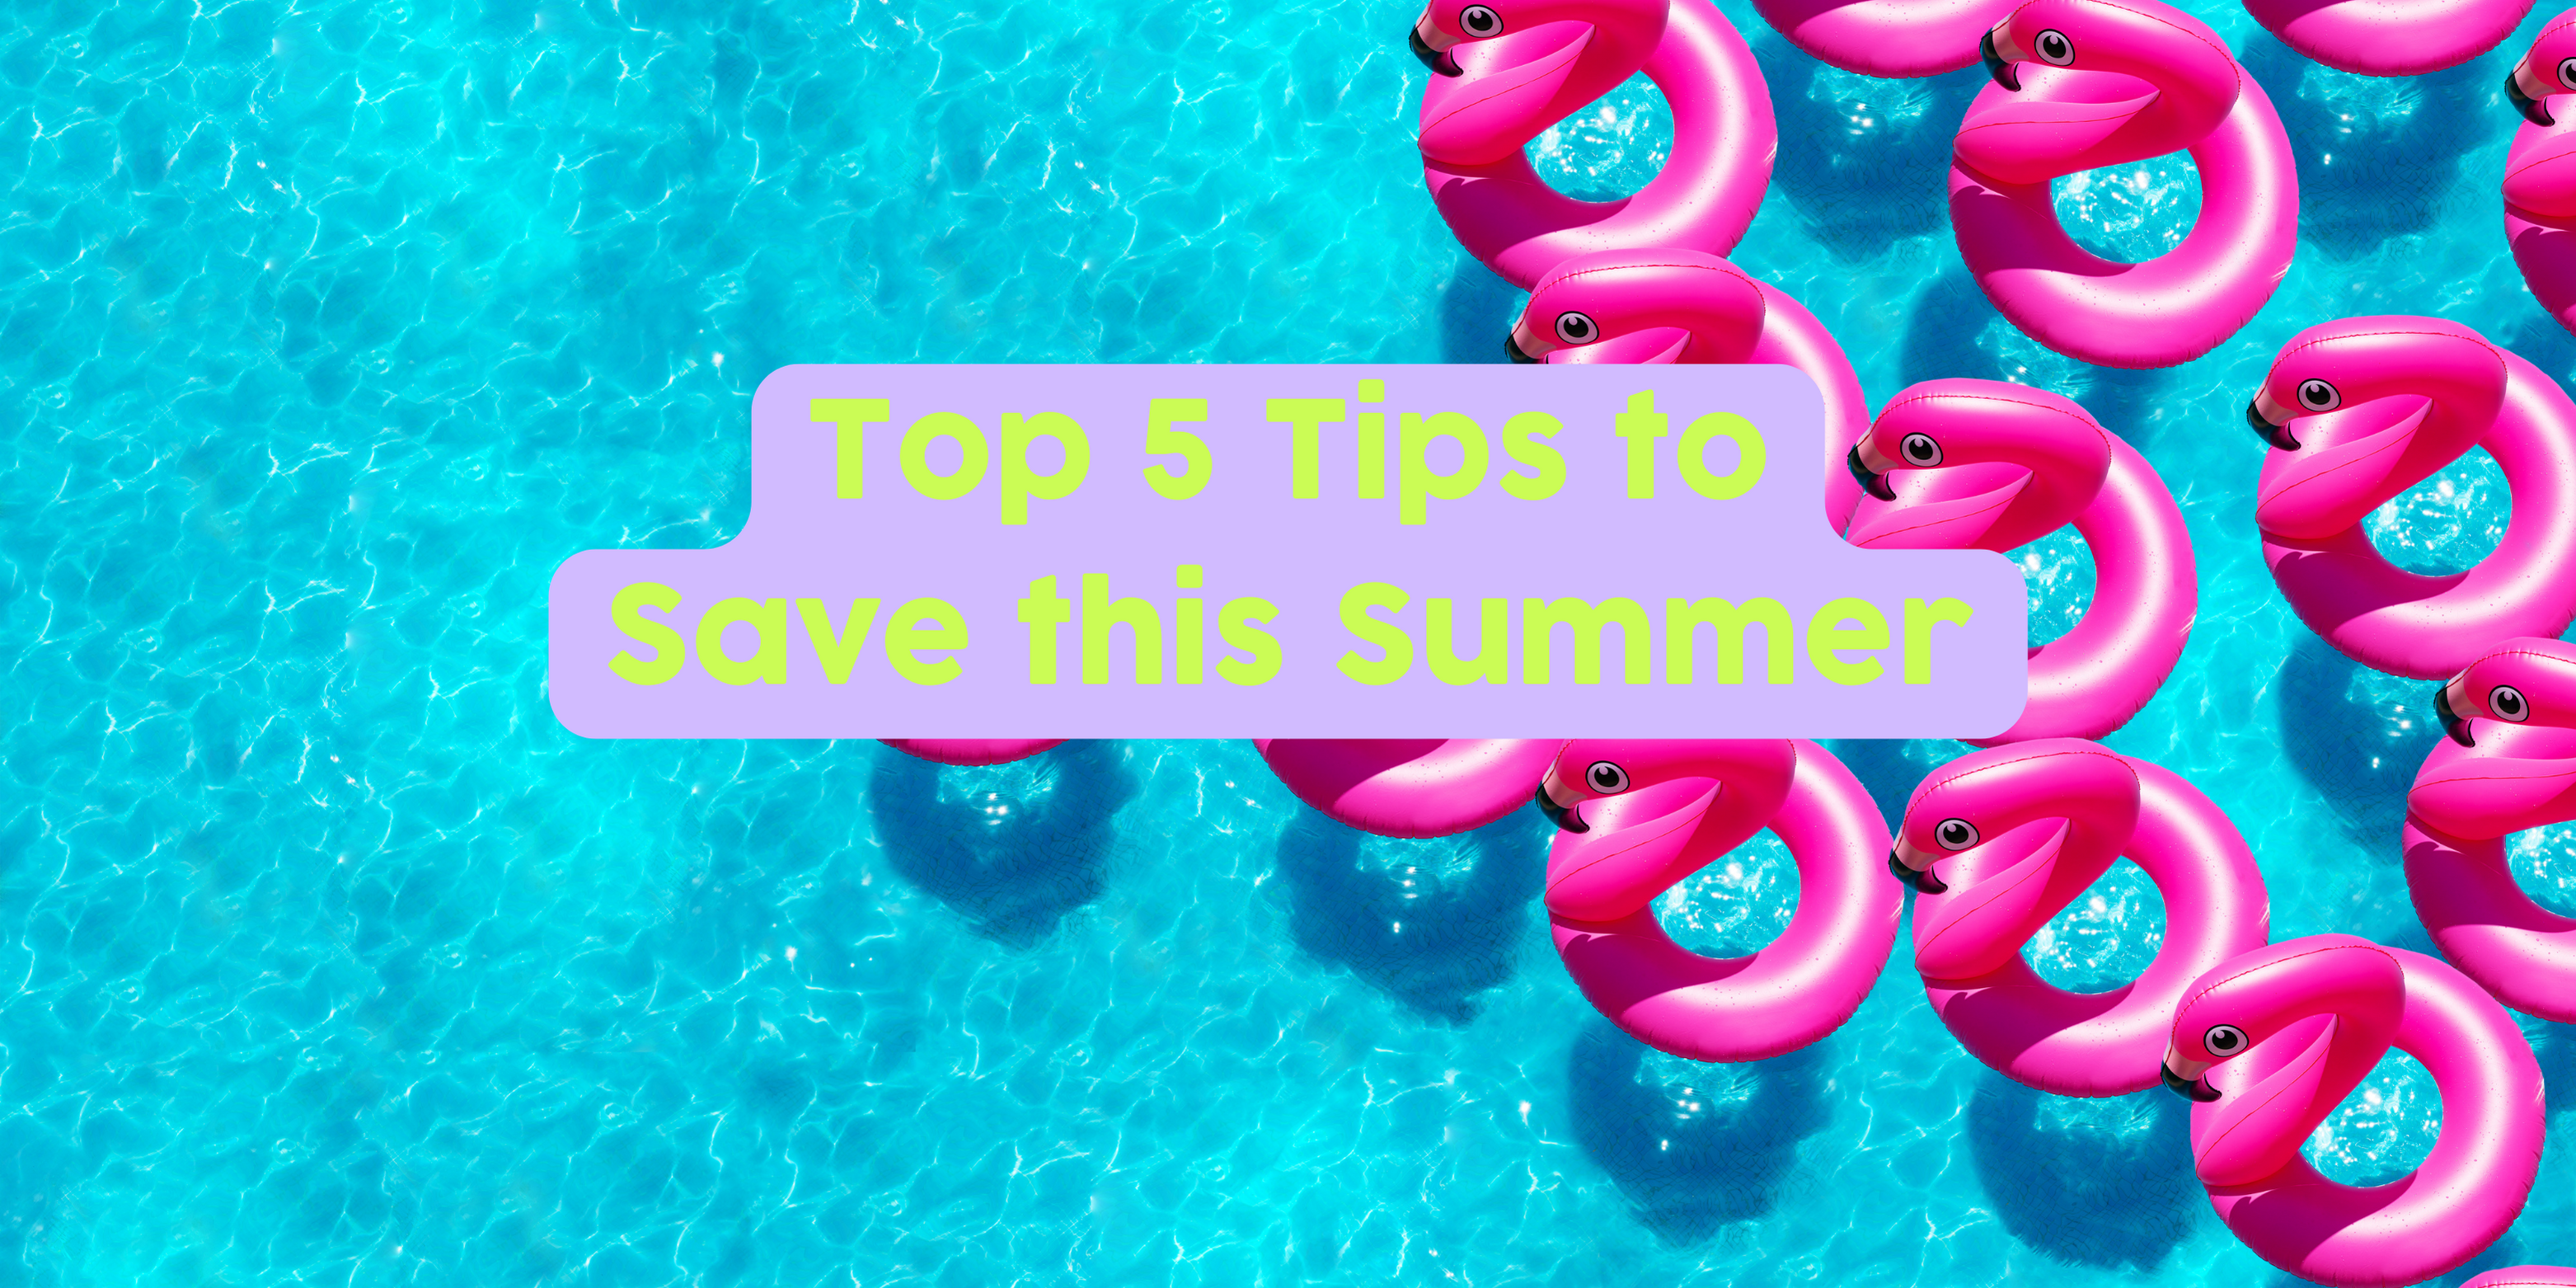 Top 5 Tips to Save this Summer